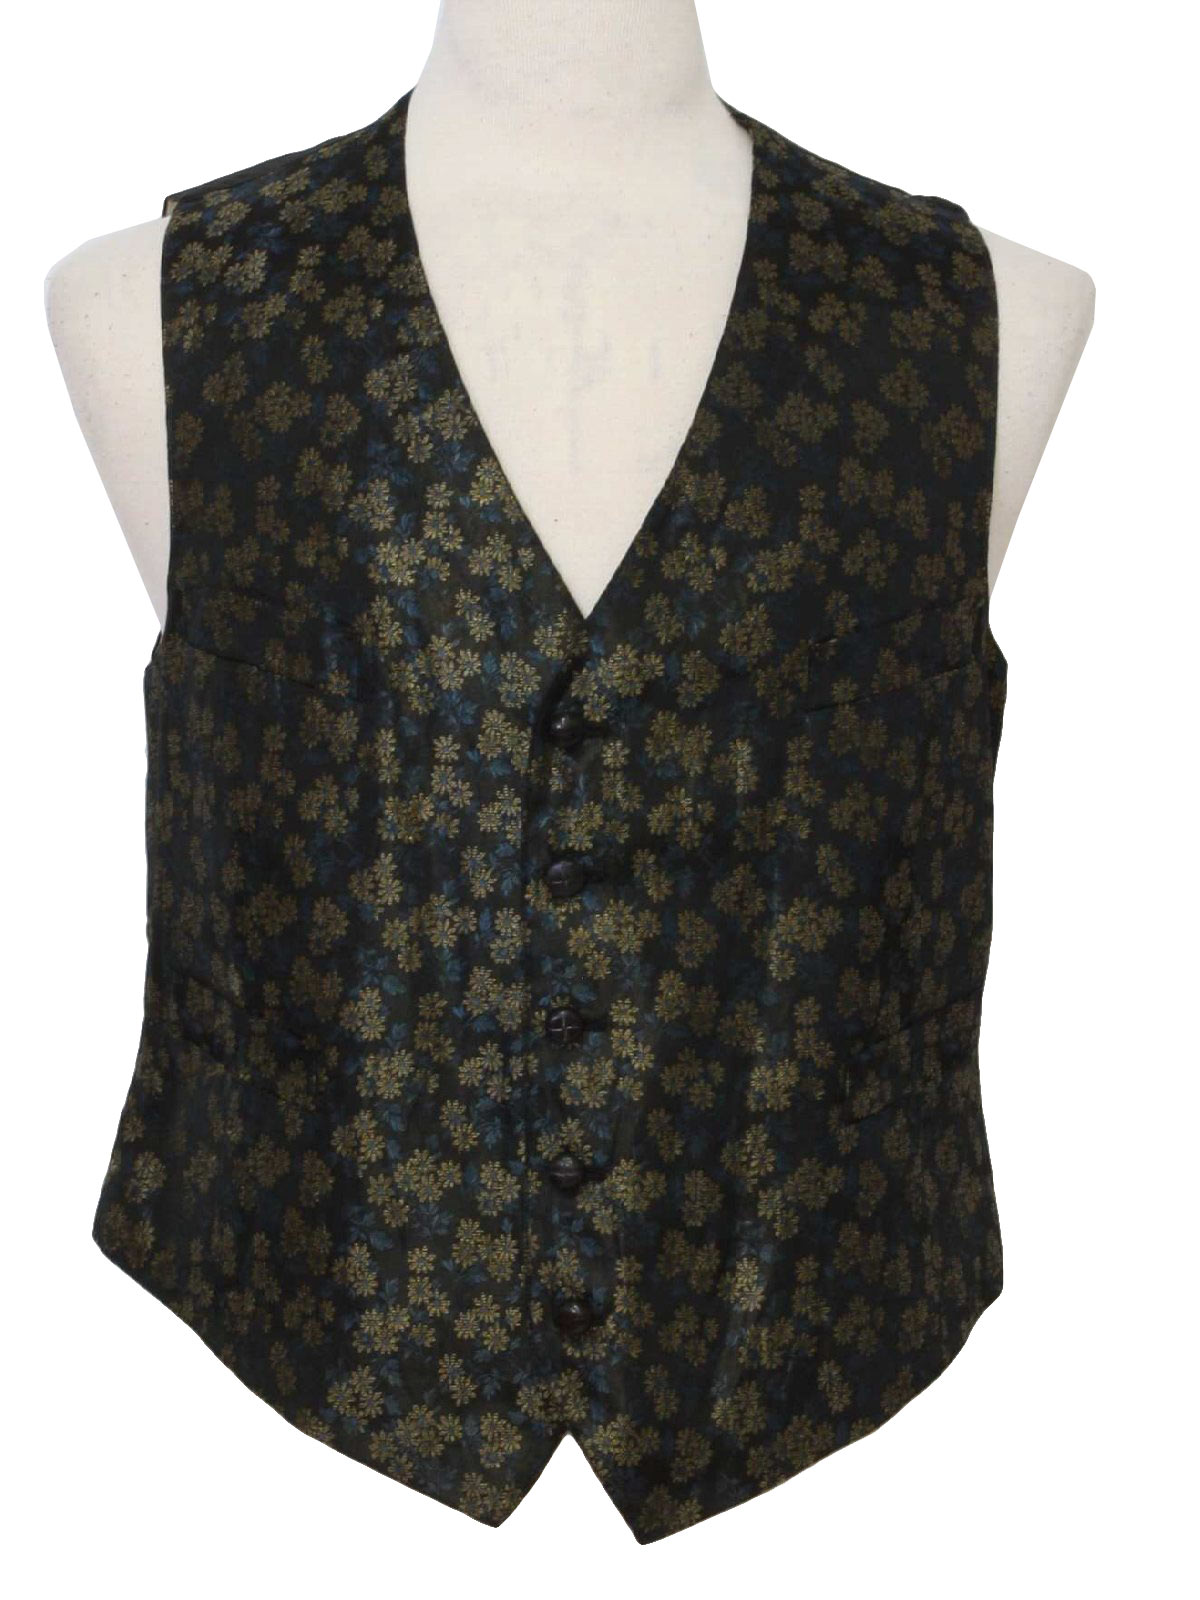 60s Vest: Early 60s -No Label- Mens black, gold floral rayon brocade ...